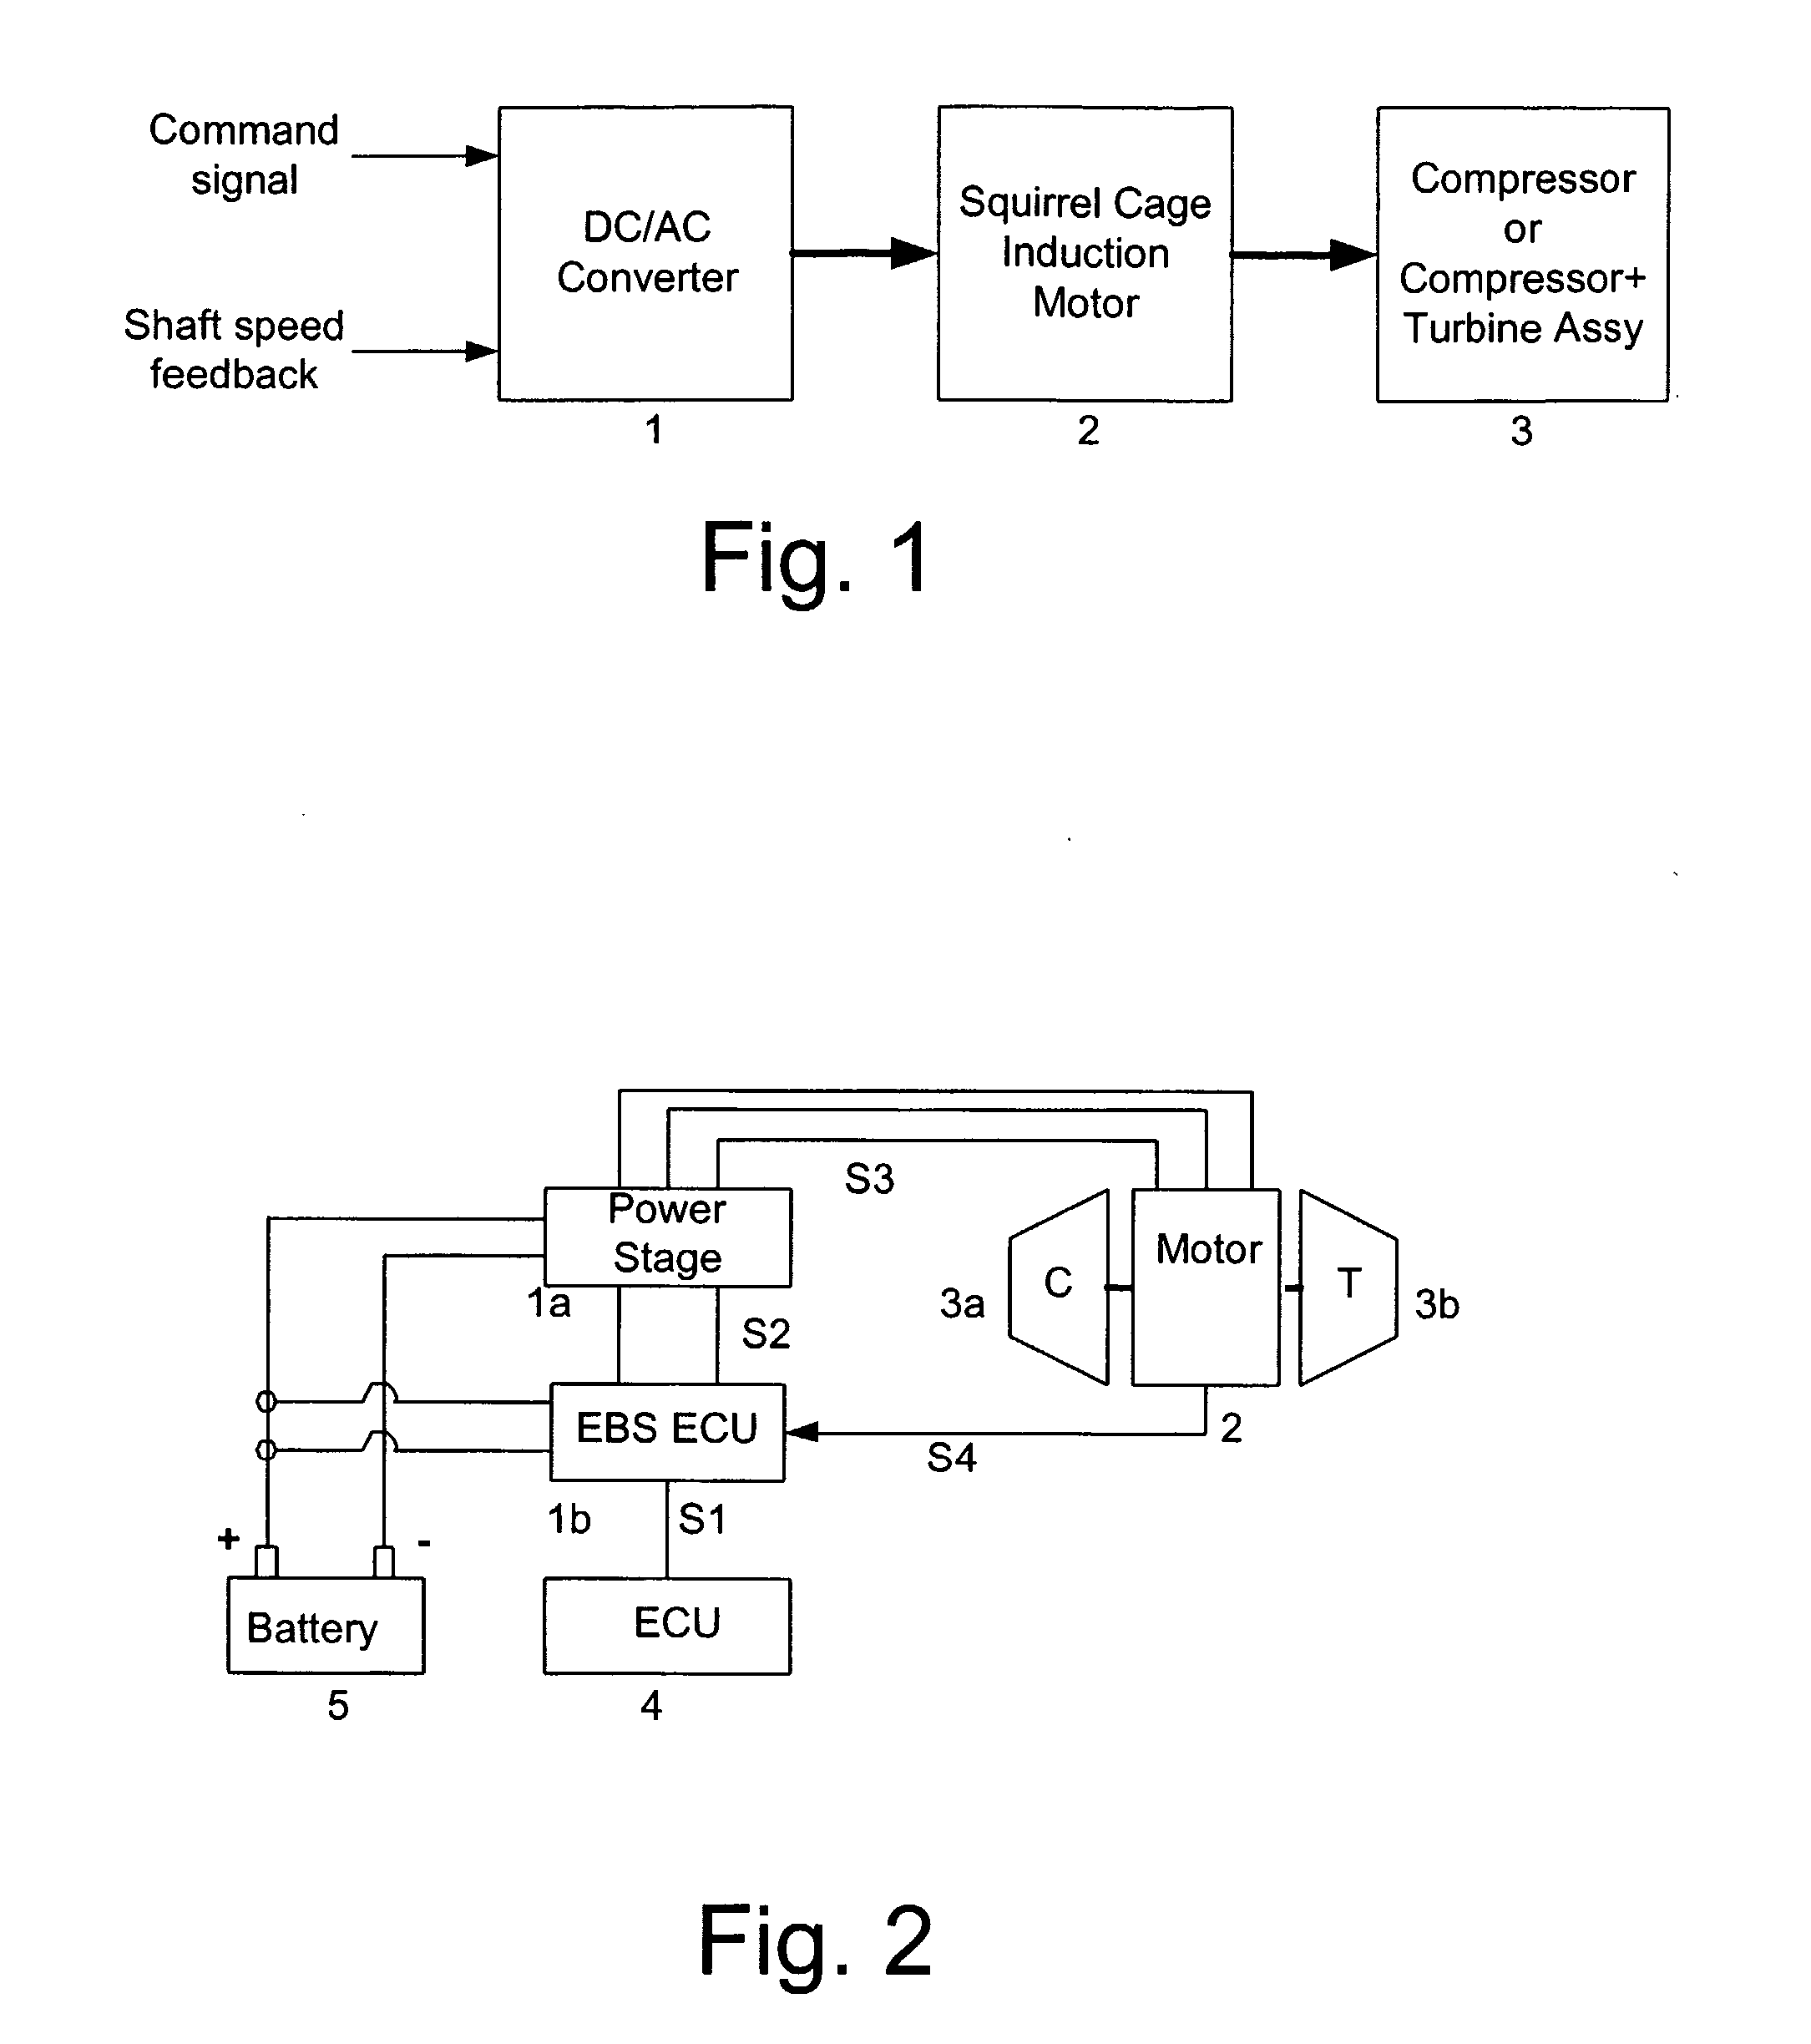 Motor Control and Driver for Electric Boosting Application